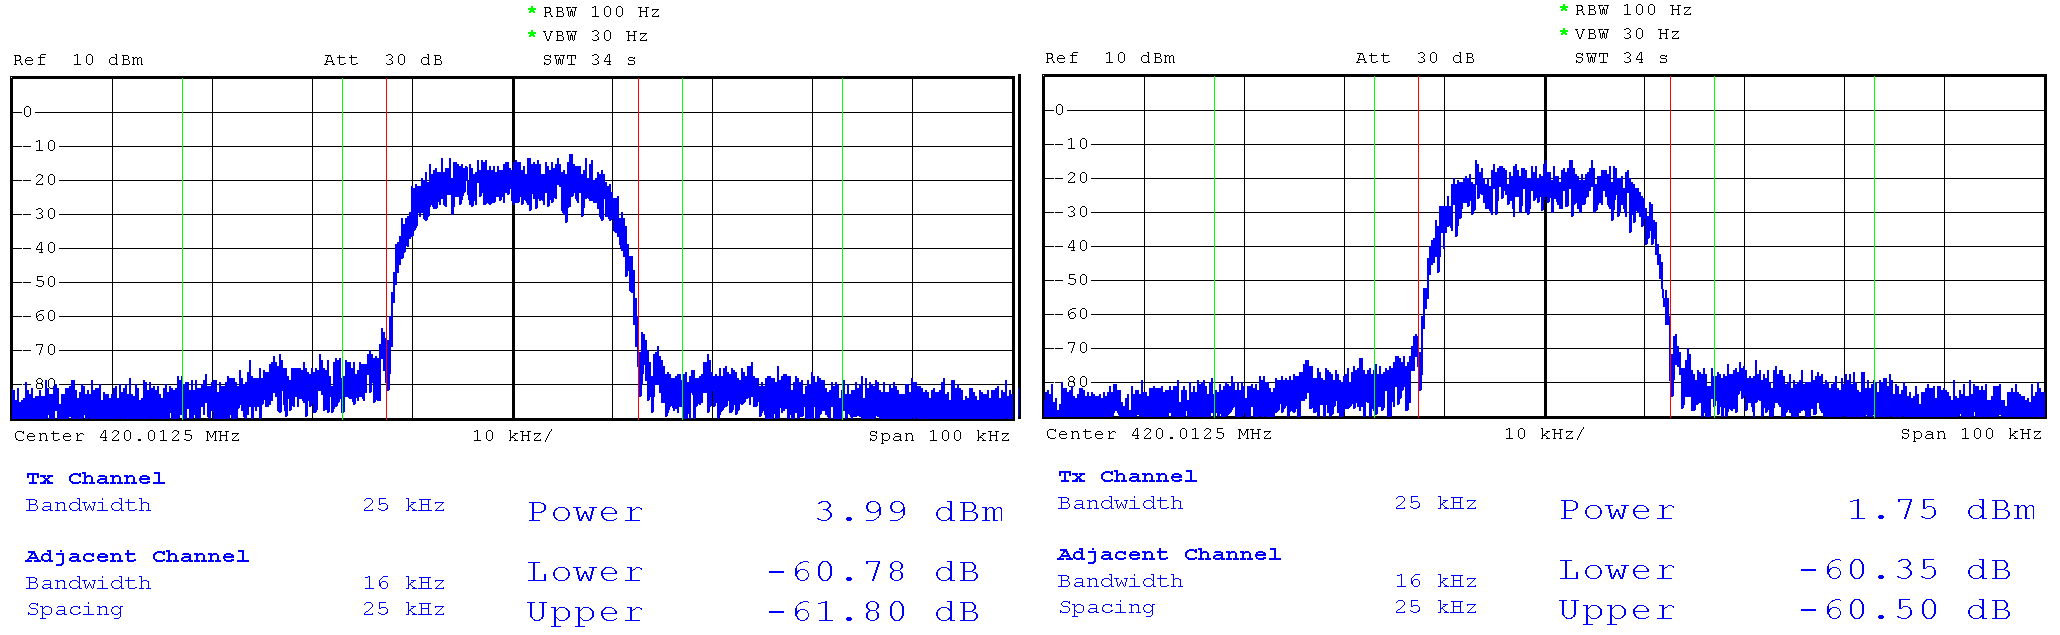 Modulated signal spectrums. (left) π/4-DQPSK with R=17.3 kBaud, (right) 16-DEQAM with R=17.3 kBaud.